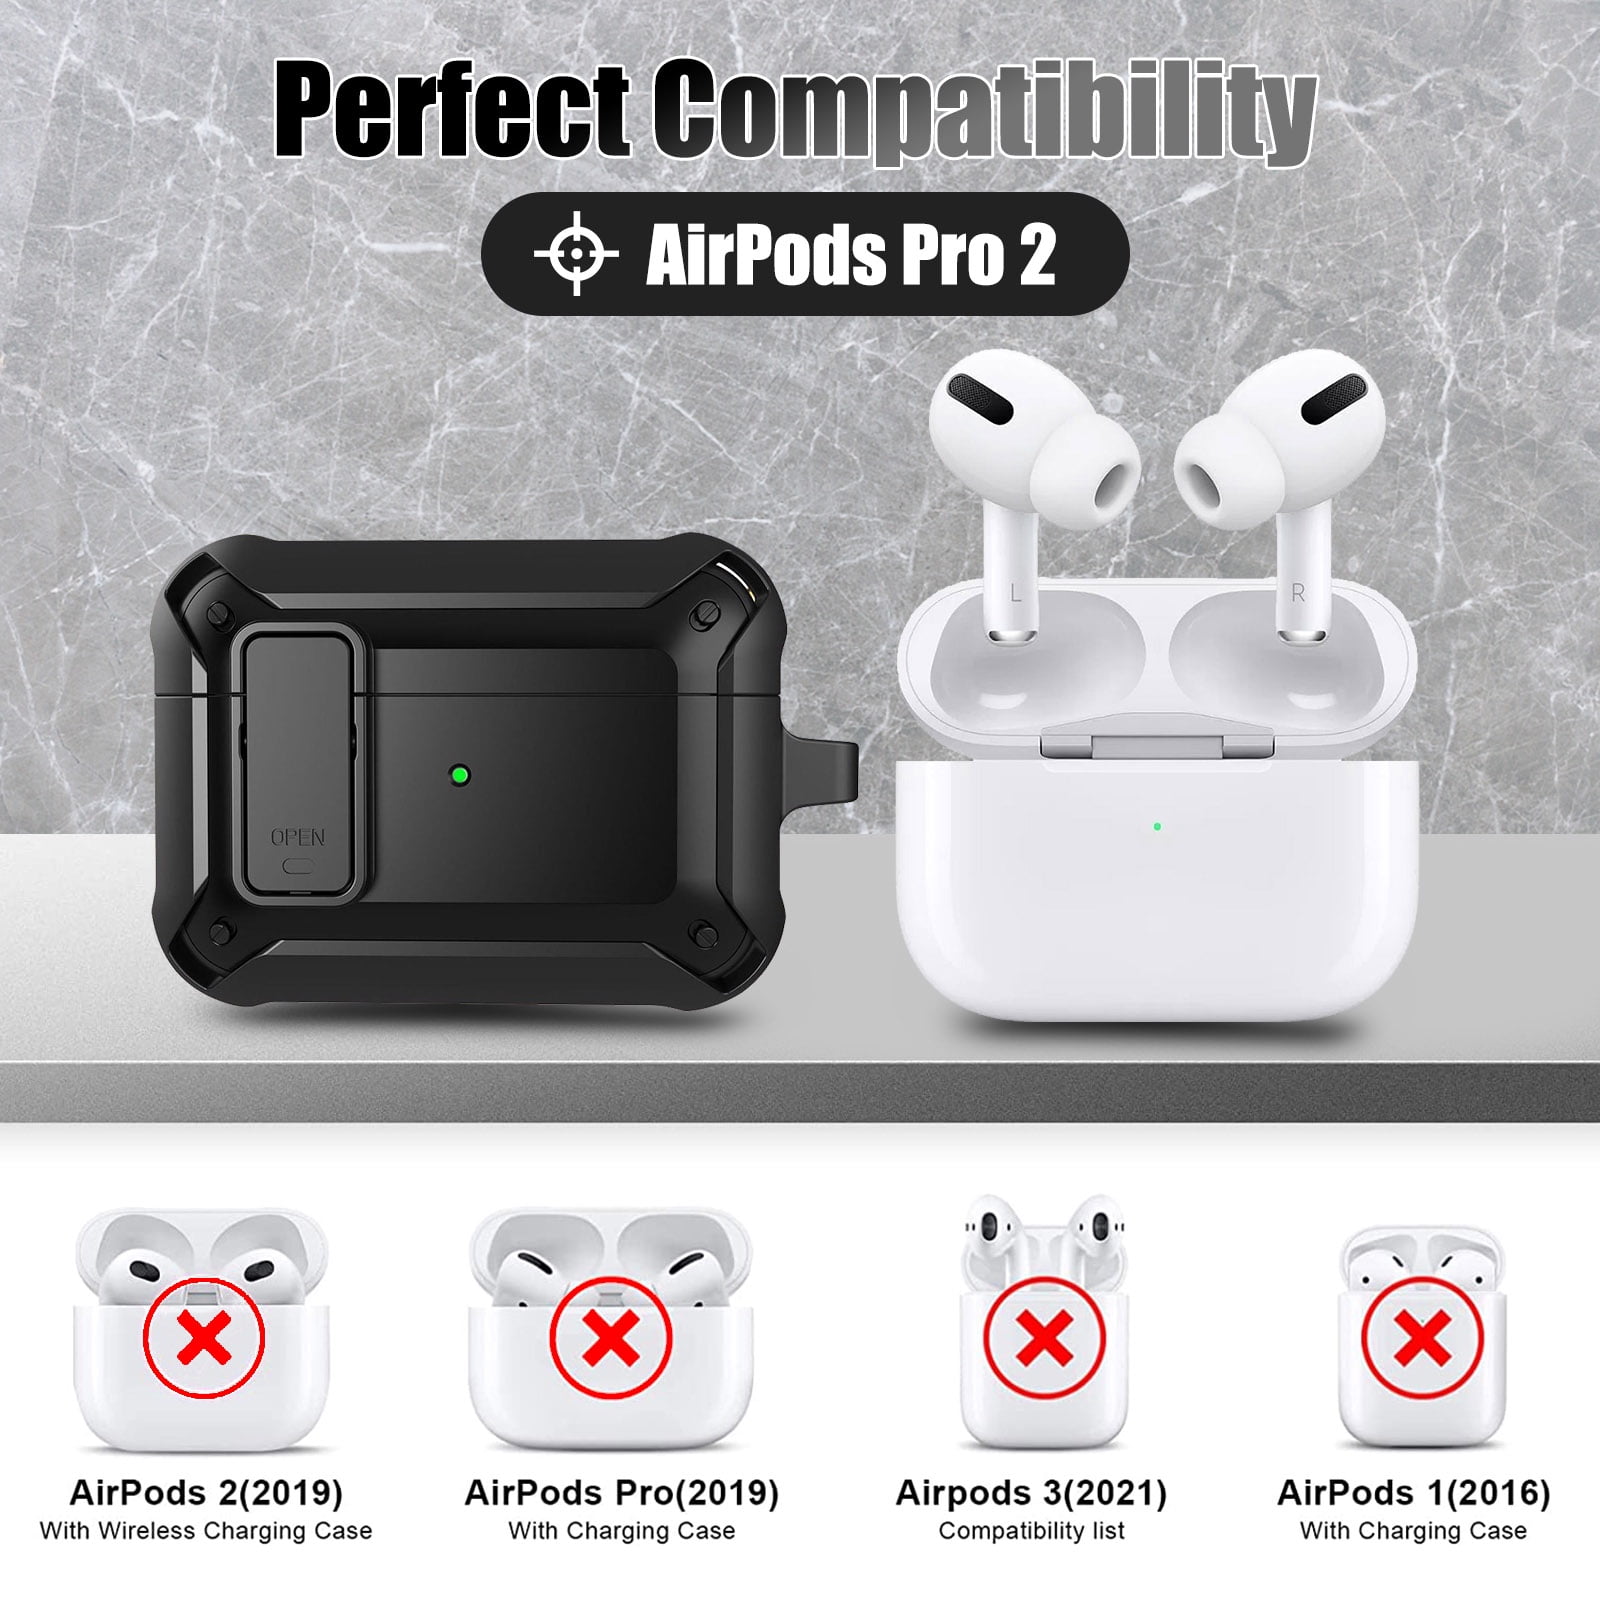 Case Cover Fits for AirPods Pro 2, TSV Protective Armor Case, TPU Rugged Shockproof Protector Skin Compatible with Airpods Pro 2nd Generation Wireless Charging, Front LED Visible, Black -